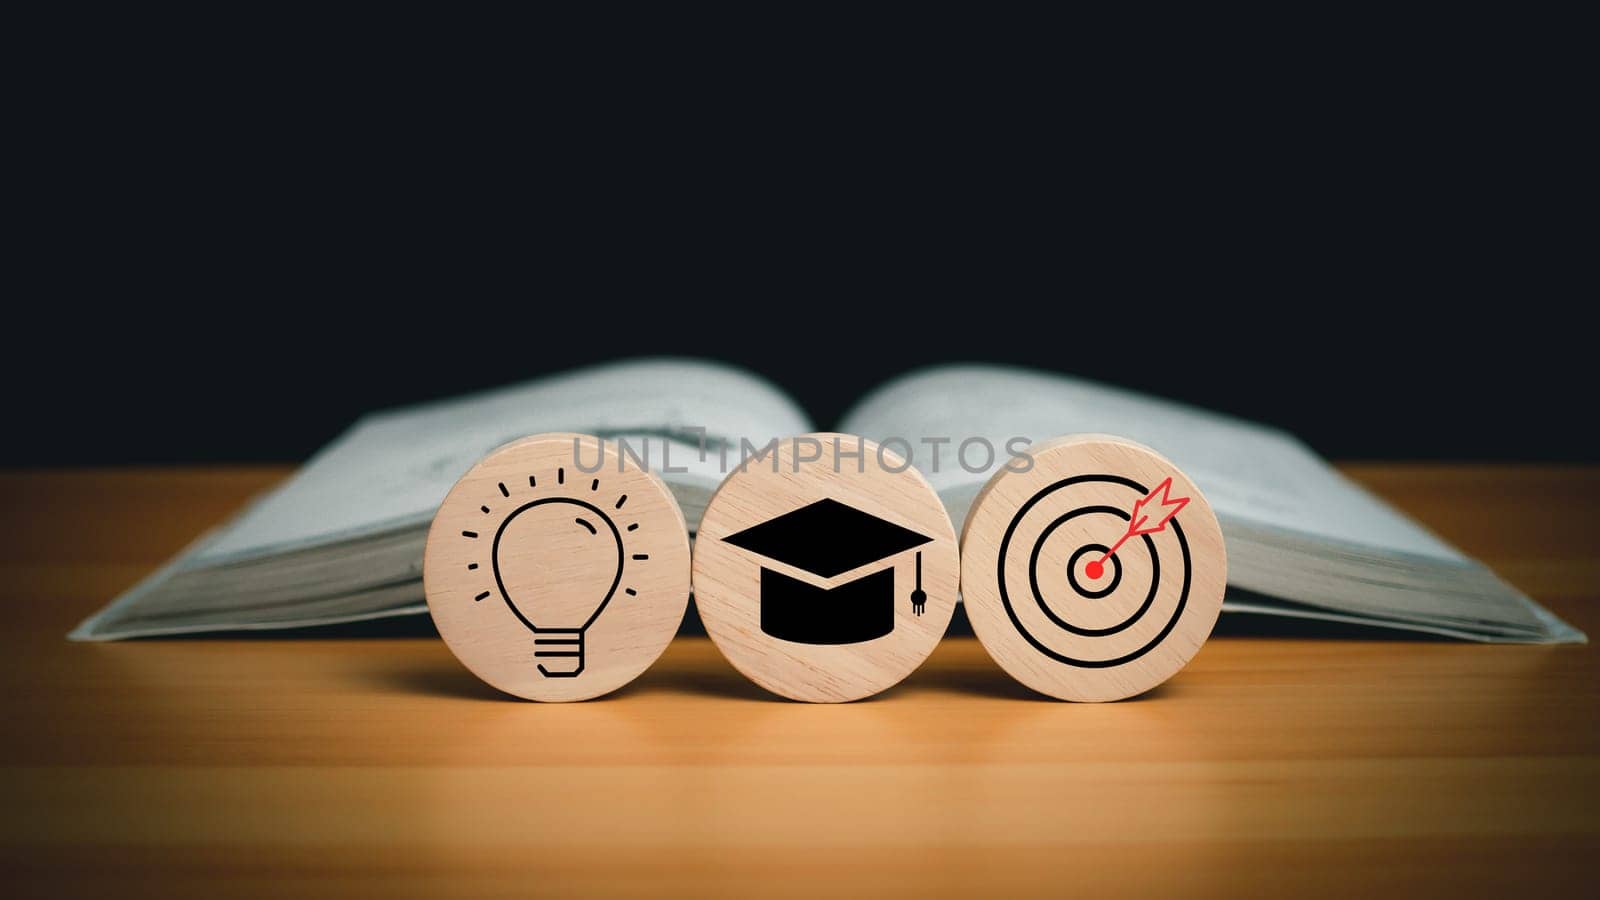 Book in library with icon, business success idea and education or learning online concept, businessperson achievement and inspiration. by Unimages2527